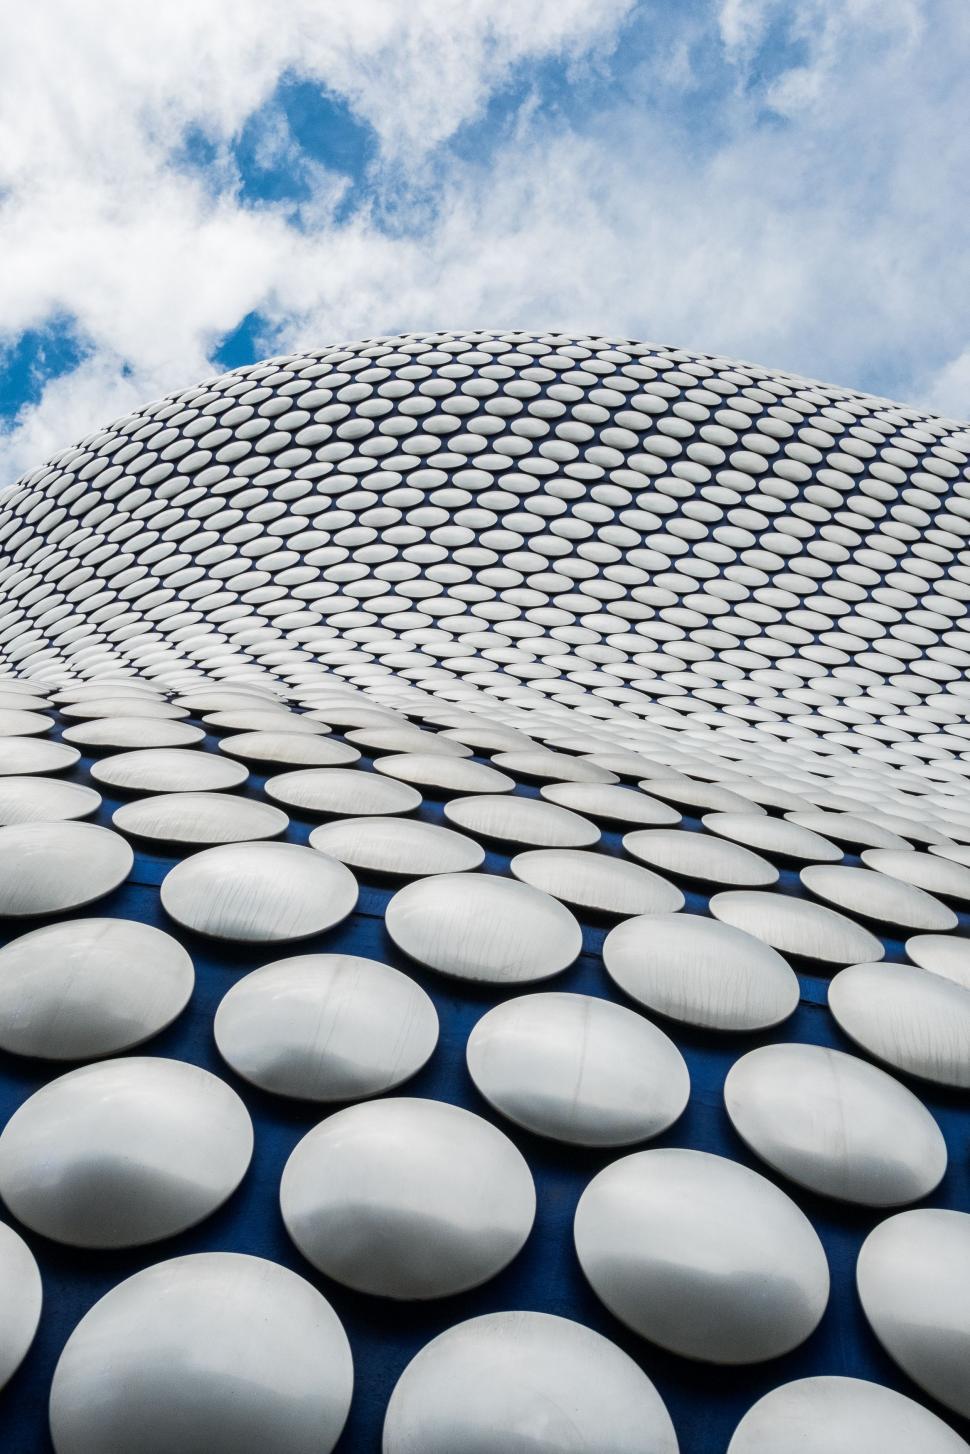 Free Image of Building Covered in White Circles 